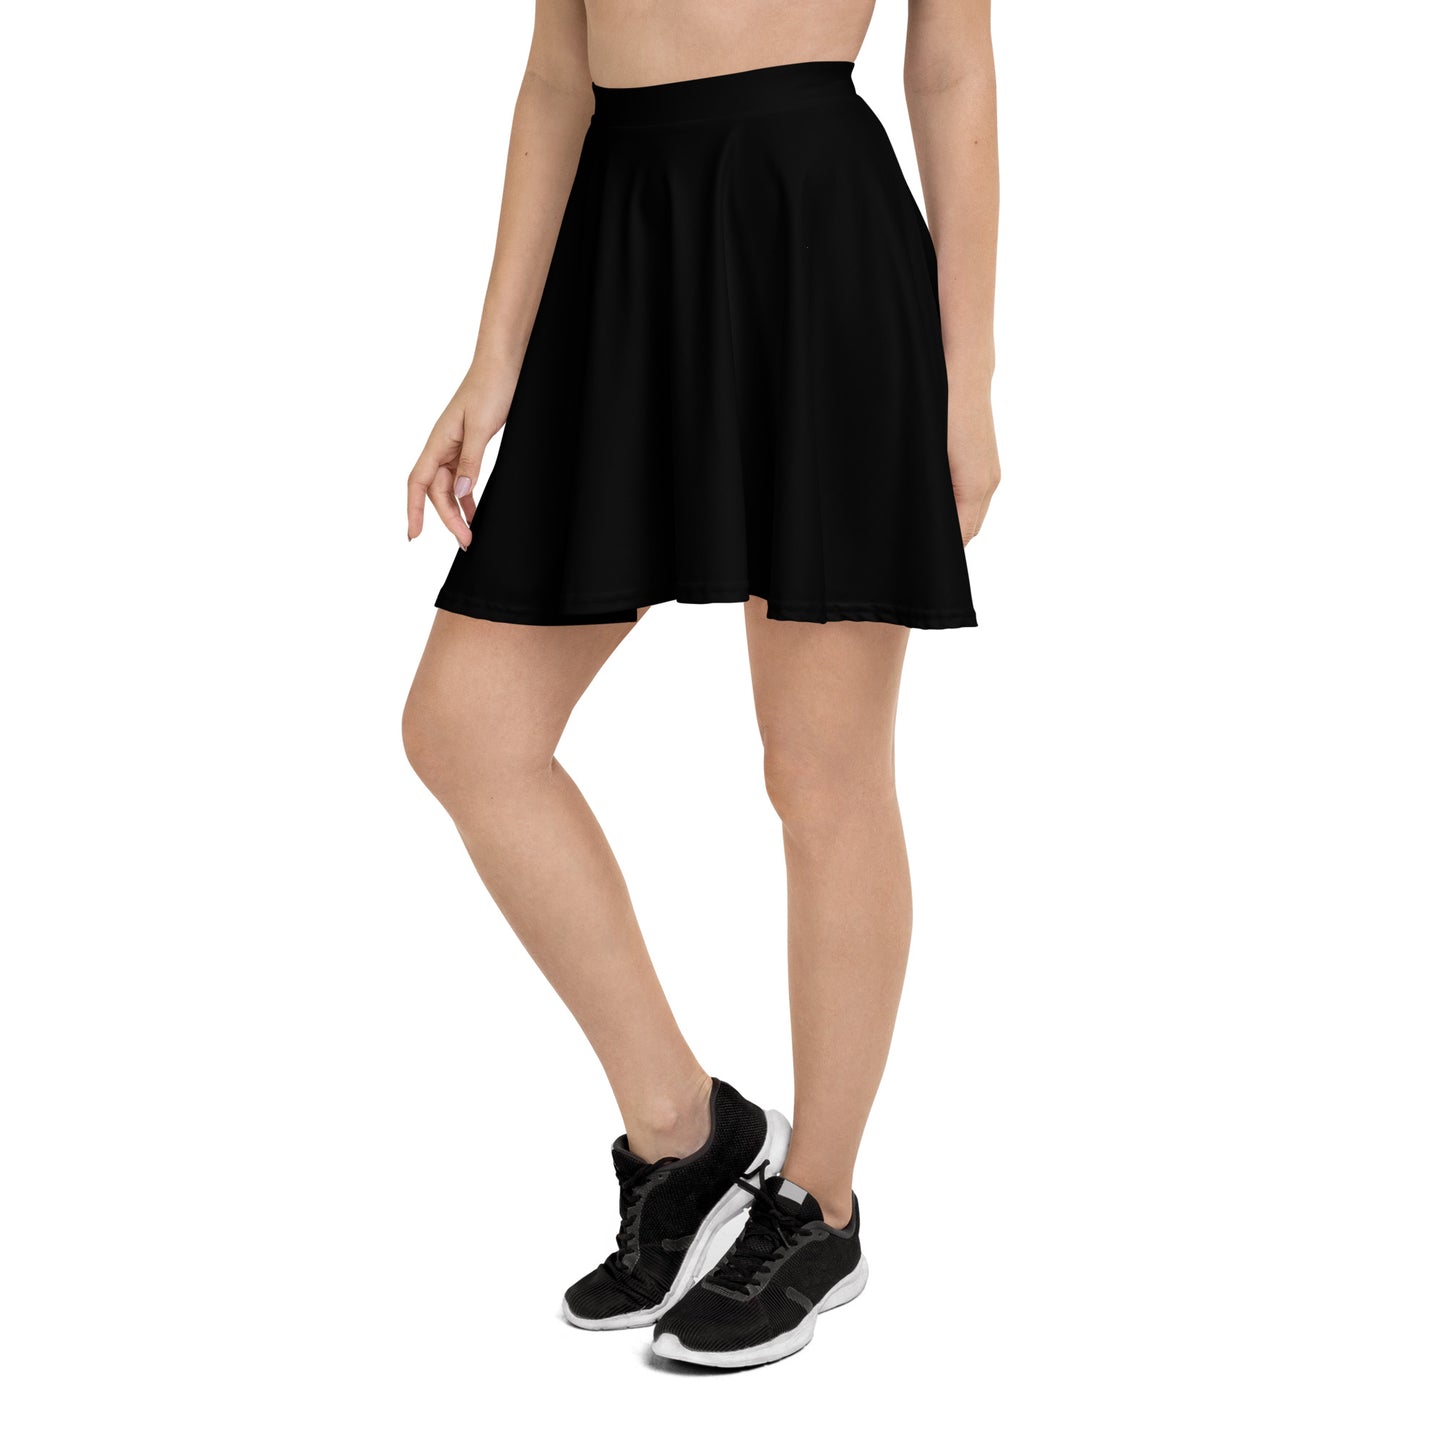 A picture of a woman waist down wearing a Products "Black" Skater Skirt and black shoes - left side